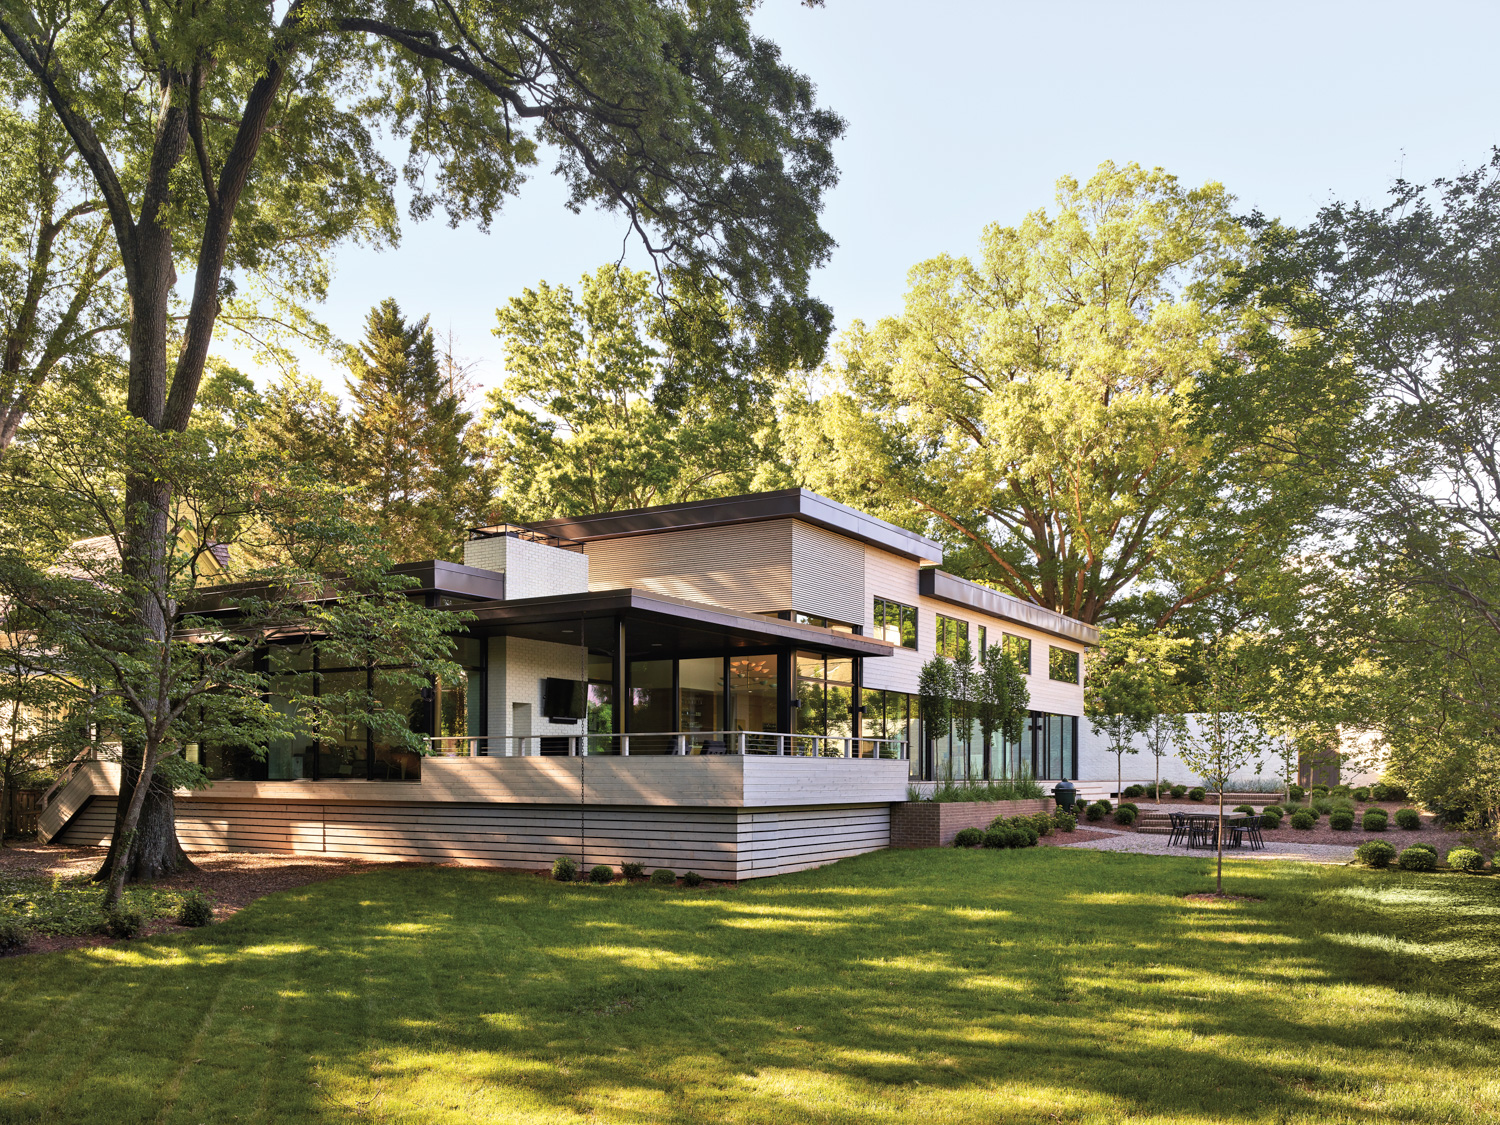 Behind The Mod N.C. Abode Inspired By A Midcentury Master